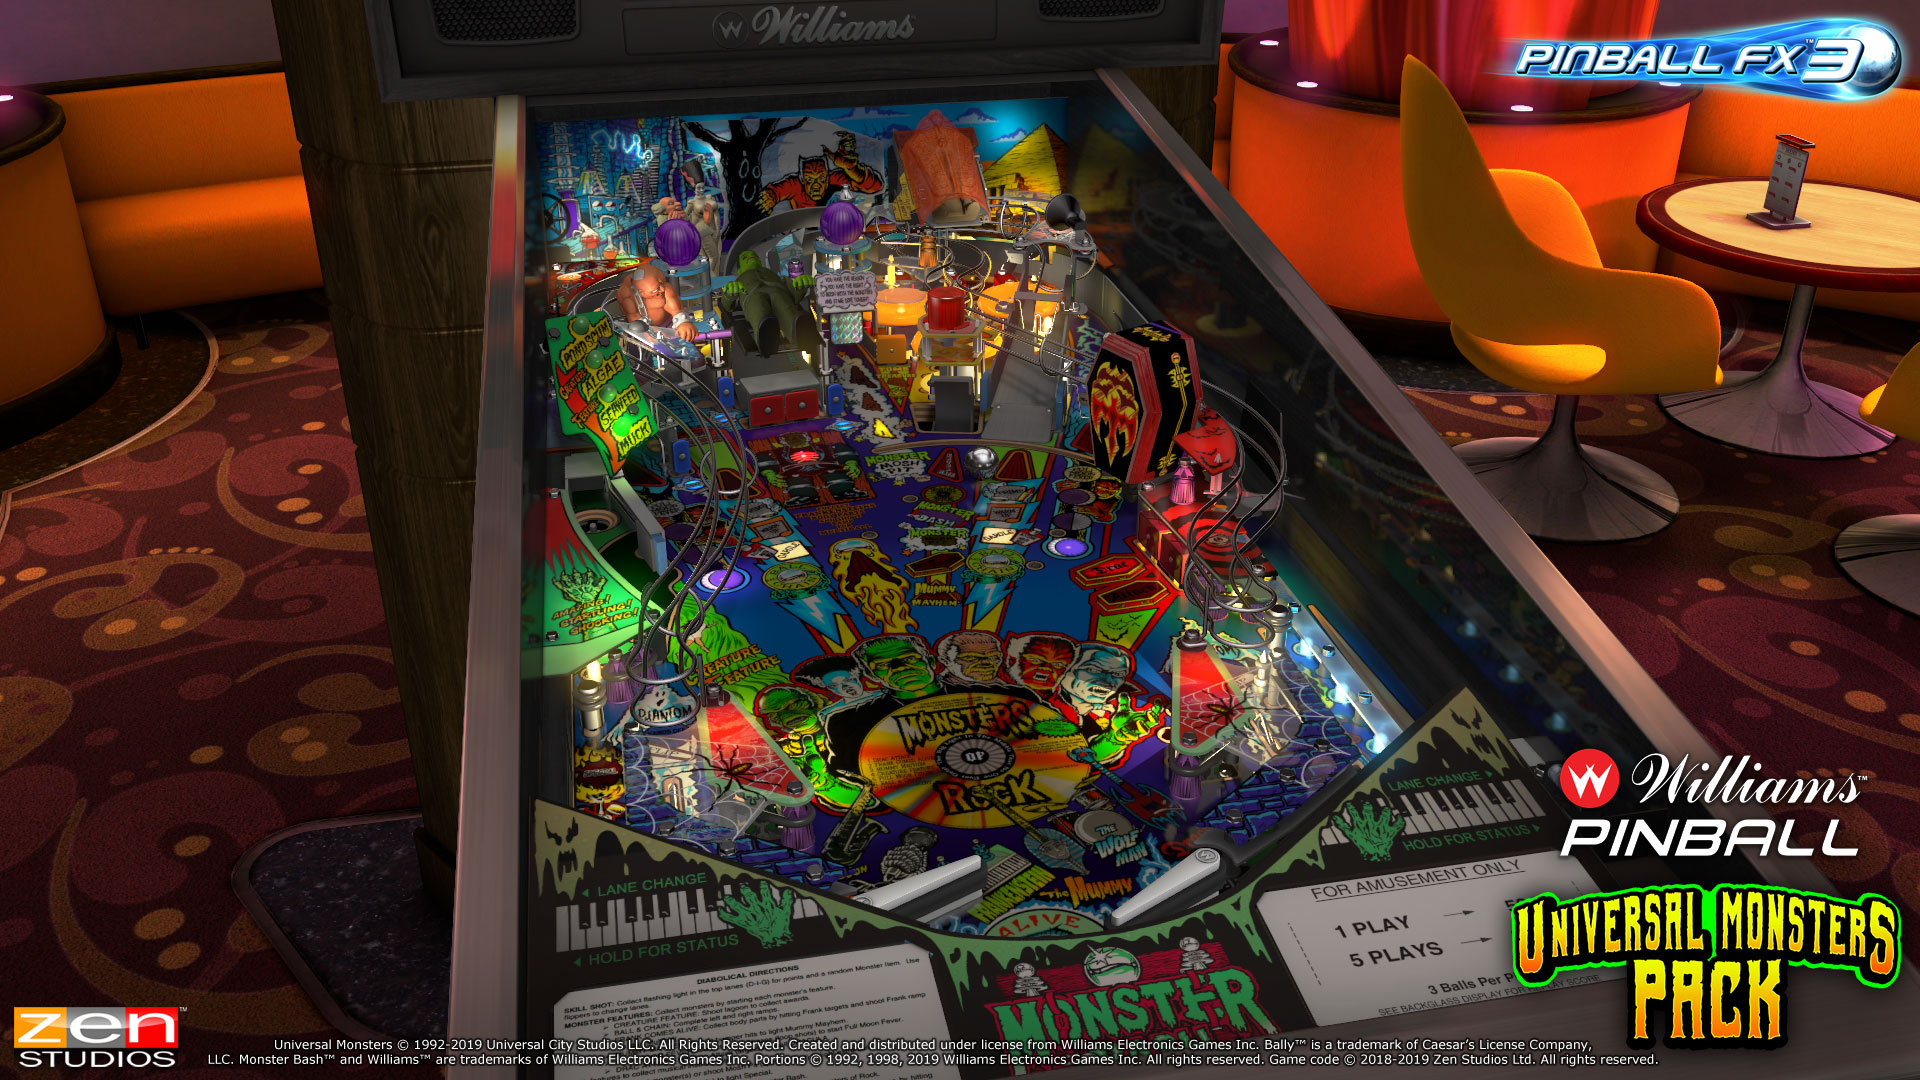 Review Pinball Fx 3 Universal Monsters Pack Dlc Mlgg Pop Culture News Reviews And Interviews